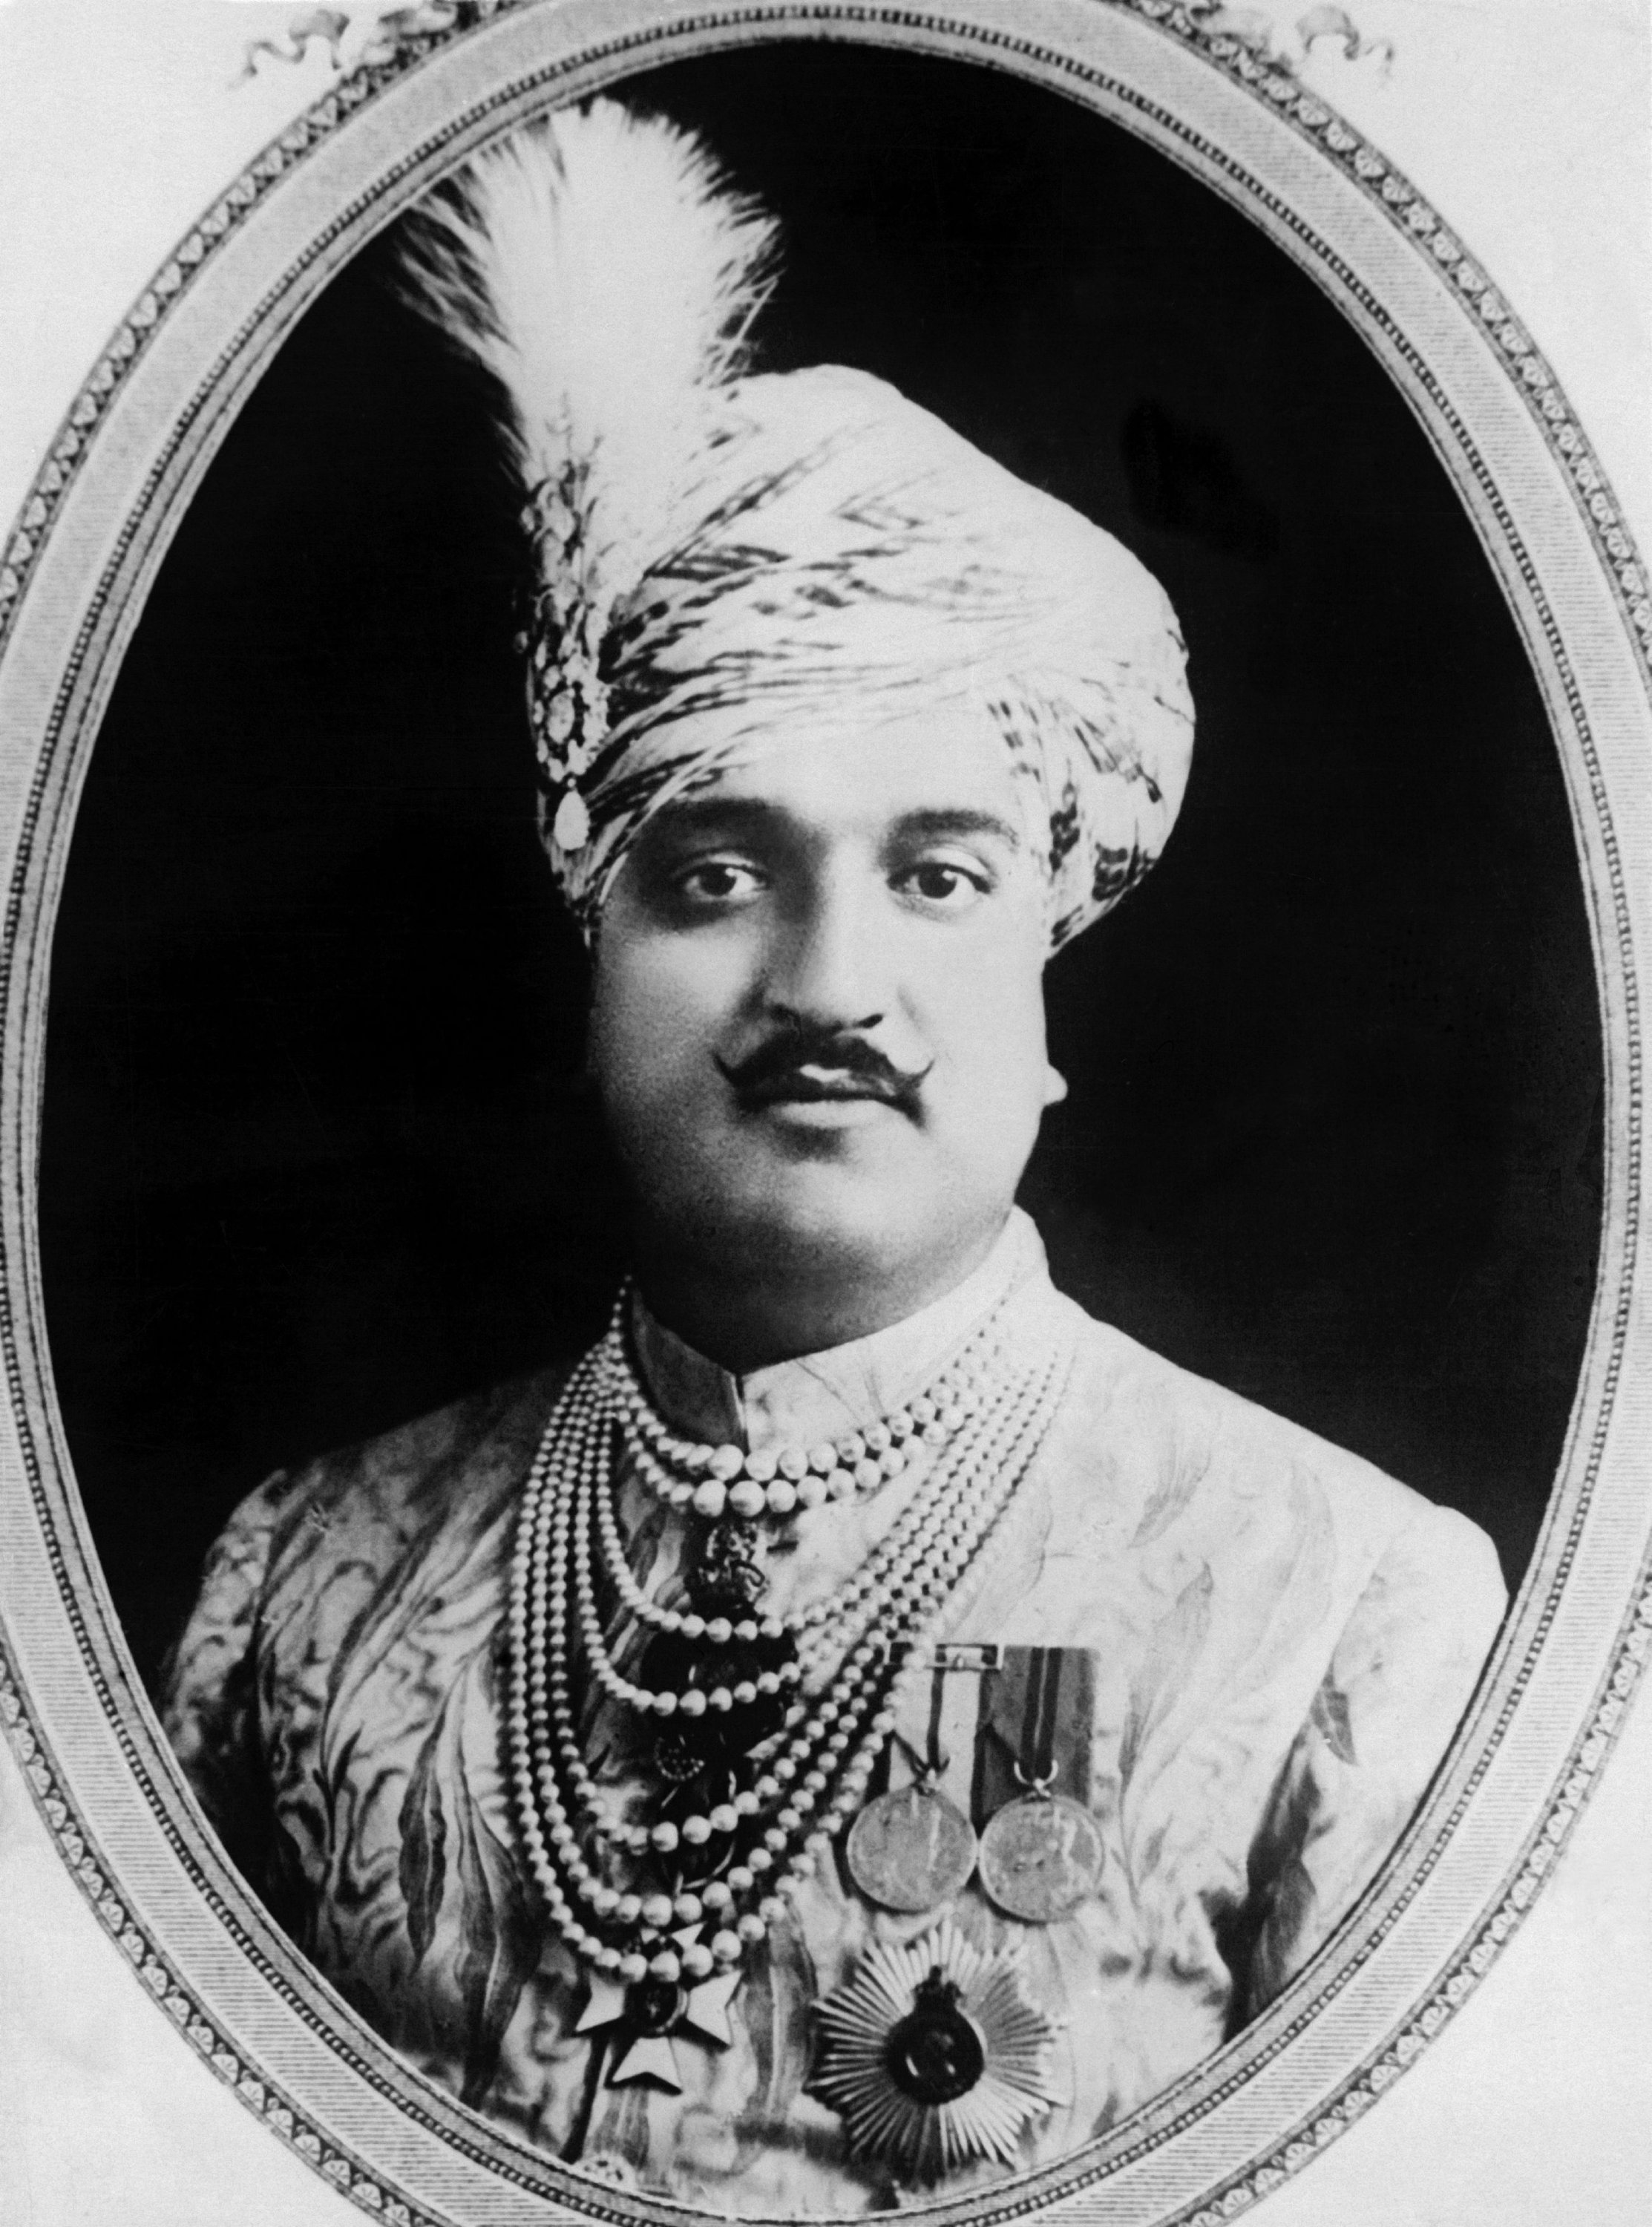 A portrait of Maharaja Hari Singh, the last ruling maharaja of the princely state of Jammu and Kashmir in the British Raj and later India. (Photo by Getty Images)